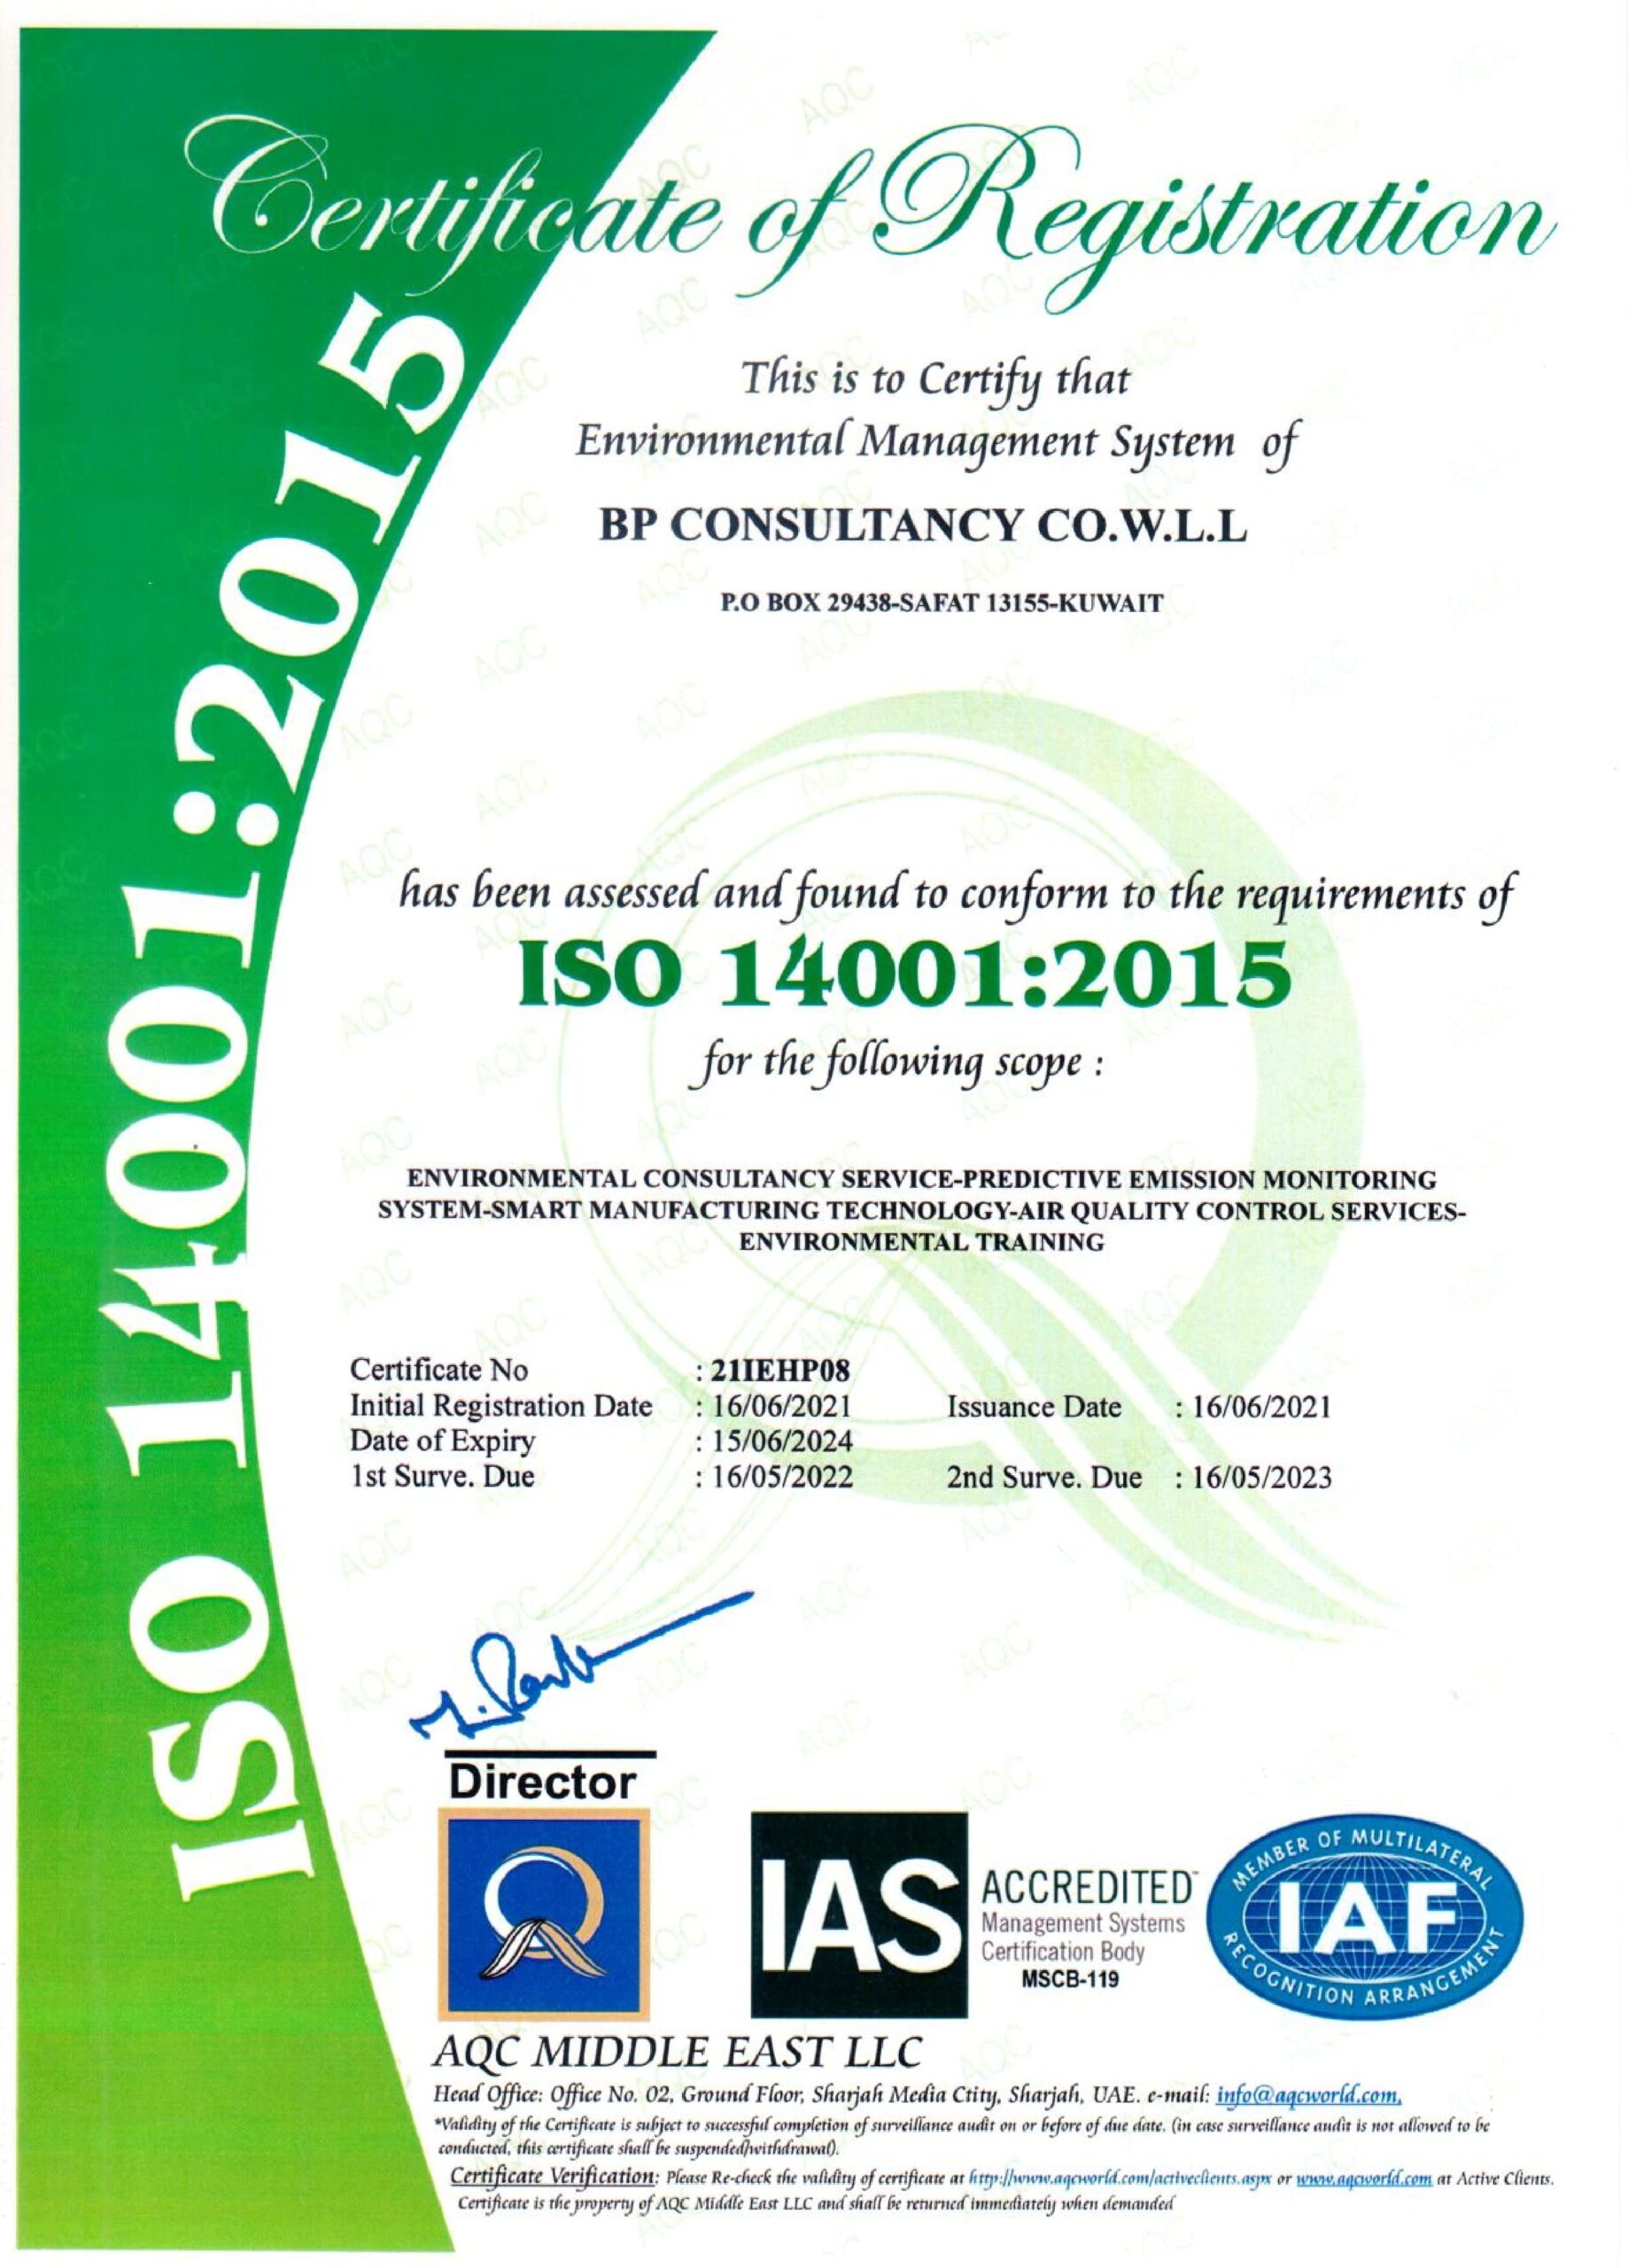 Certification to ISO 14001:2015